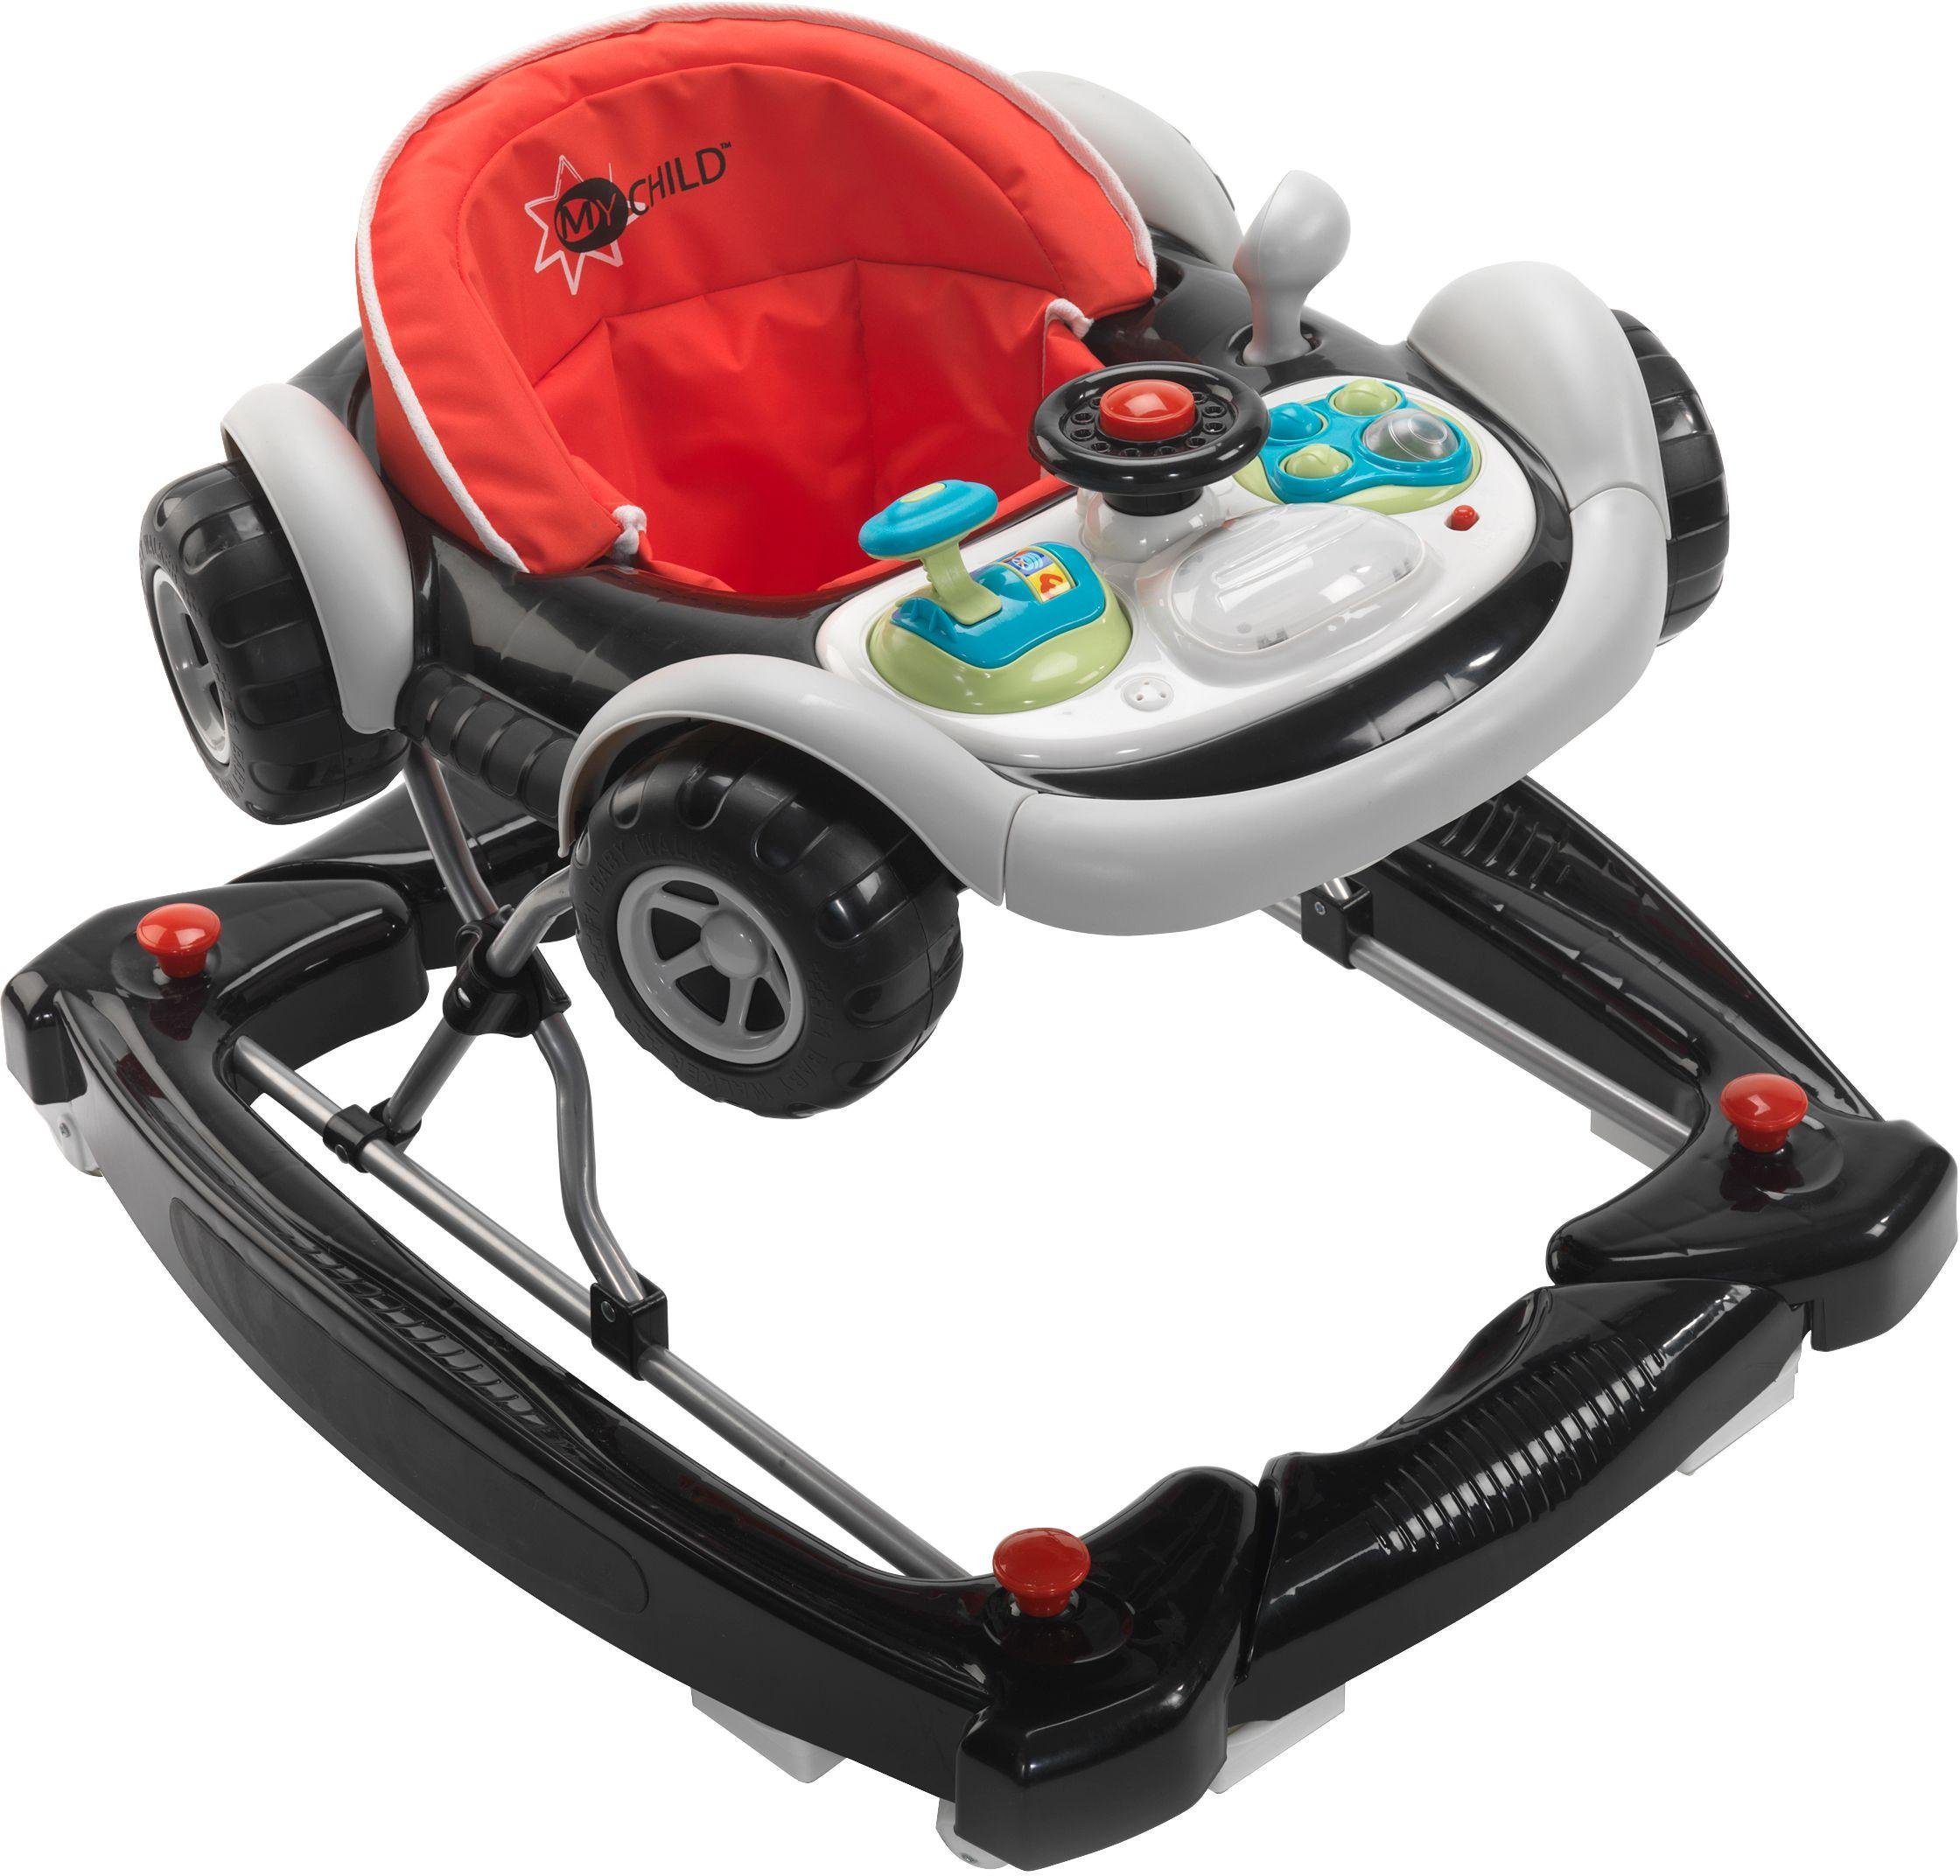 MyChild Coupe 2 In 1 Baby Walker Review